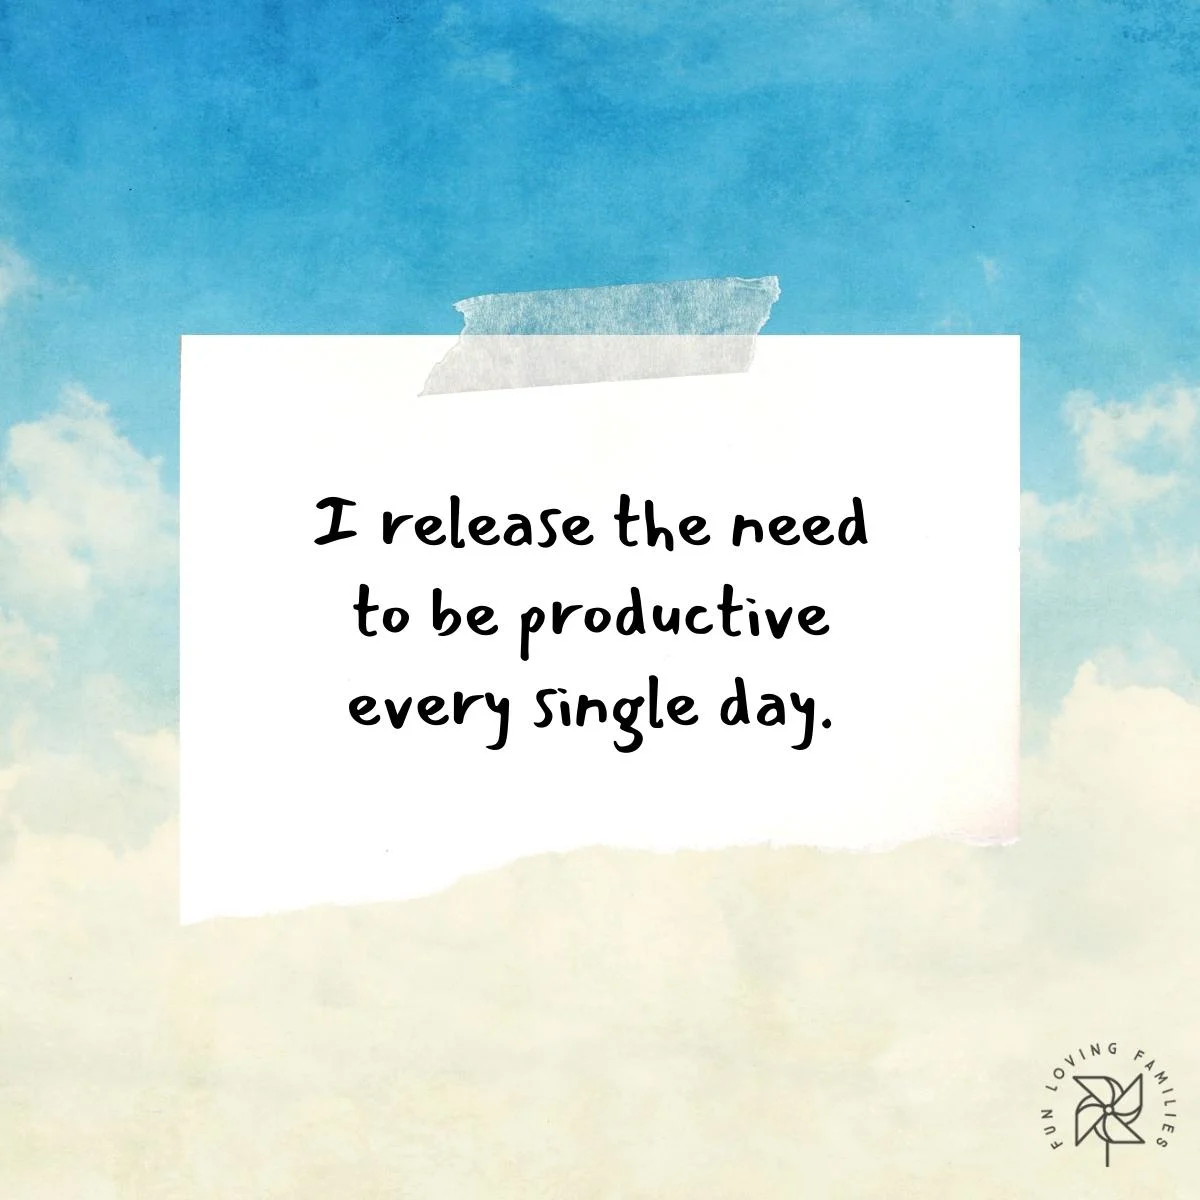 I release the need to be productive every single day affirmation